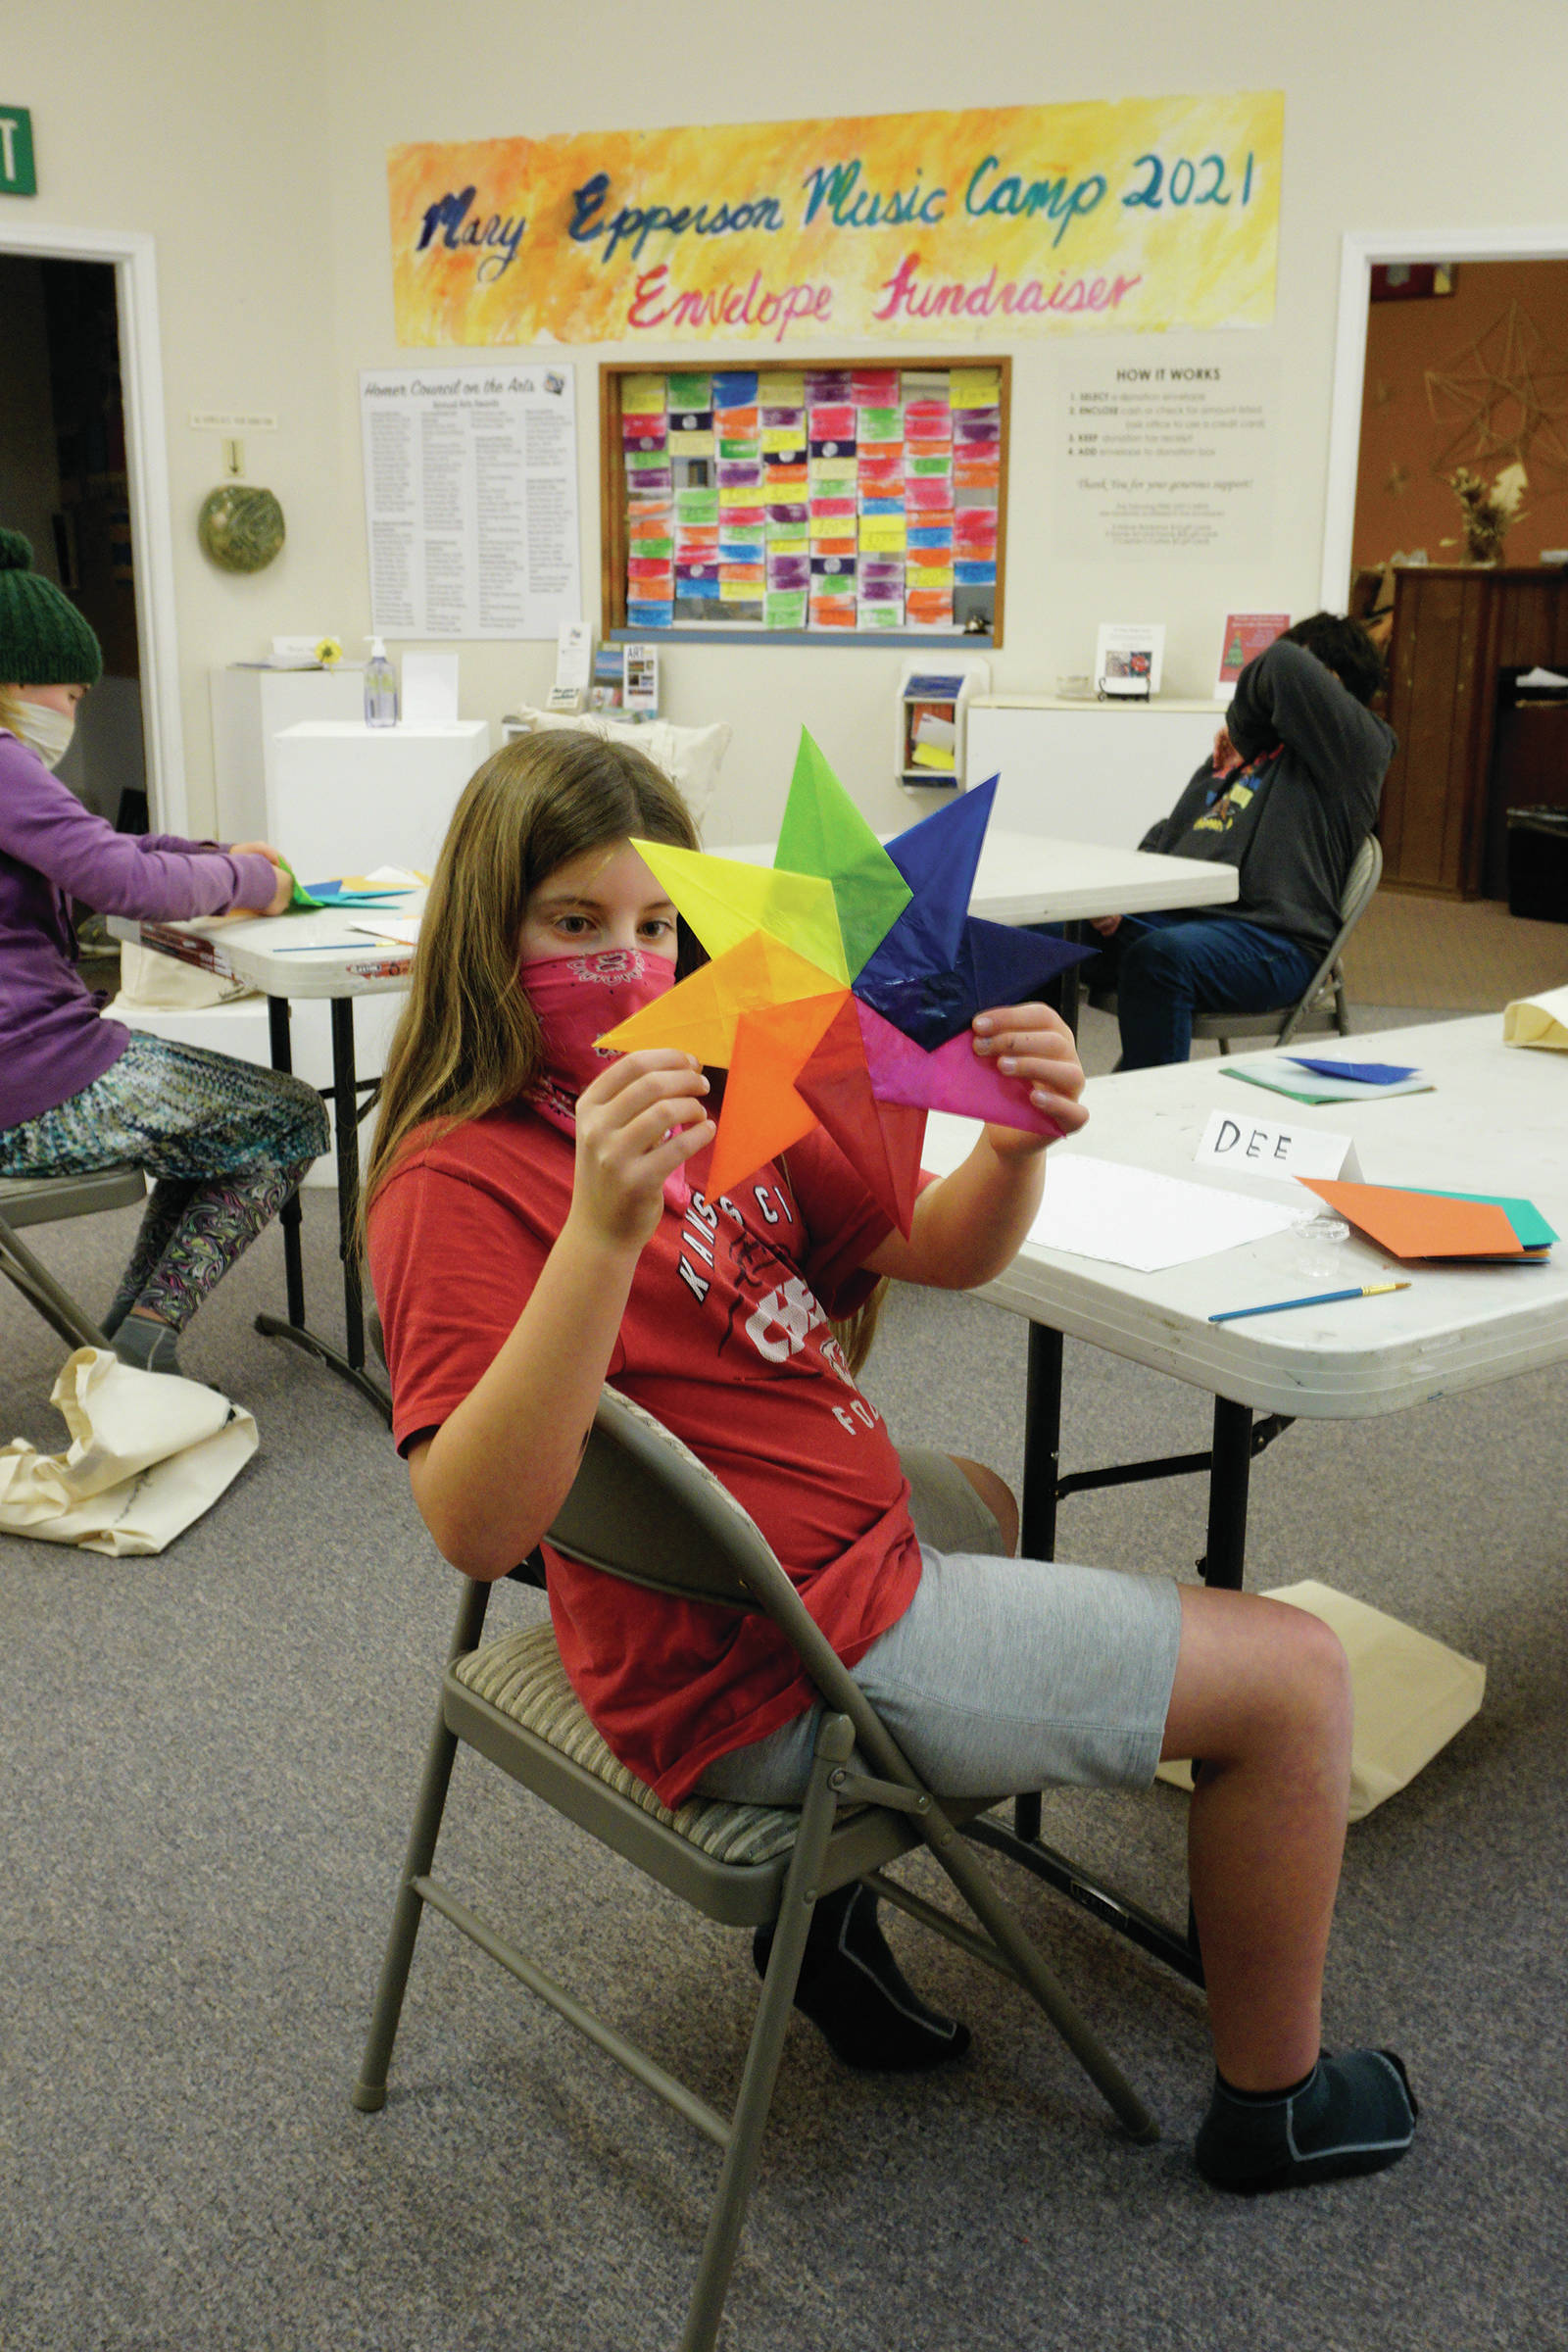 Dee Wilmeth, age 9, shows an origami star she made in Amy Komar’s socially-distant Art a la Carte class last Friday at the Homer Council on the Arts. Children in the class wore masks and worked at either end of long tables spaced apart. The stars will be placed in store windows “for a dose of color therapy for the community,” Komar said. (Photo by Michael Armstrong/Homer News)